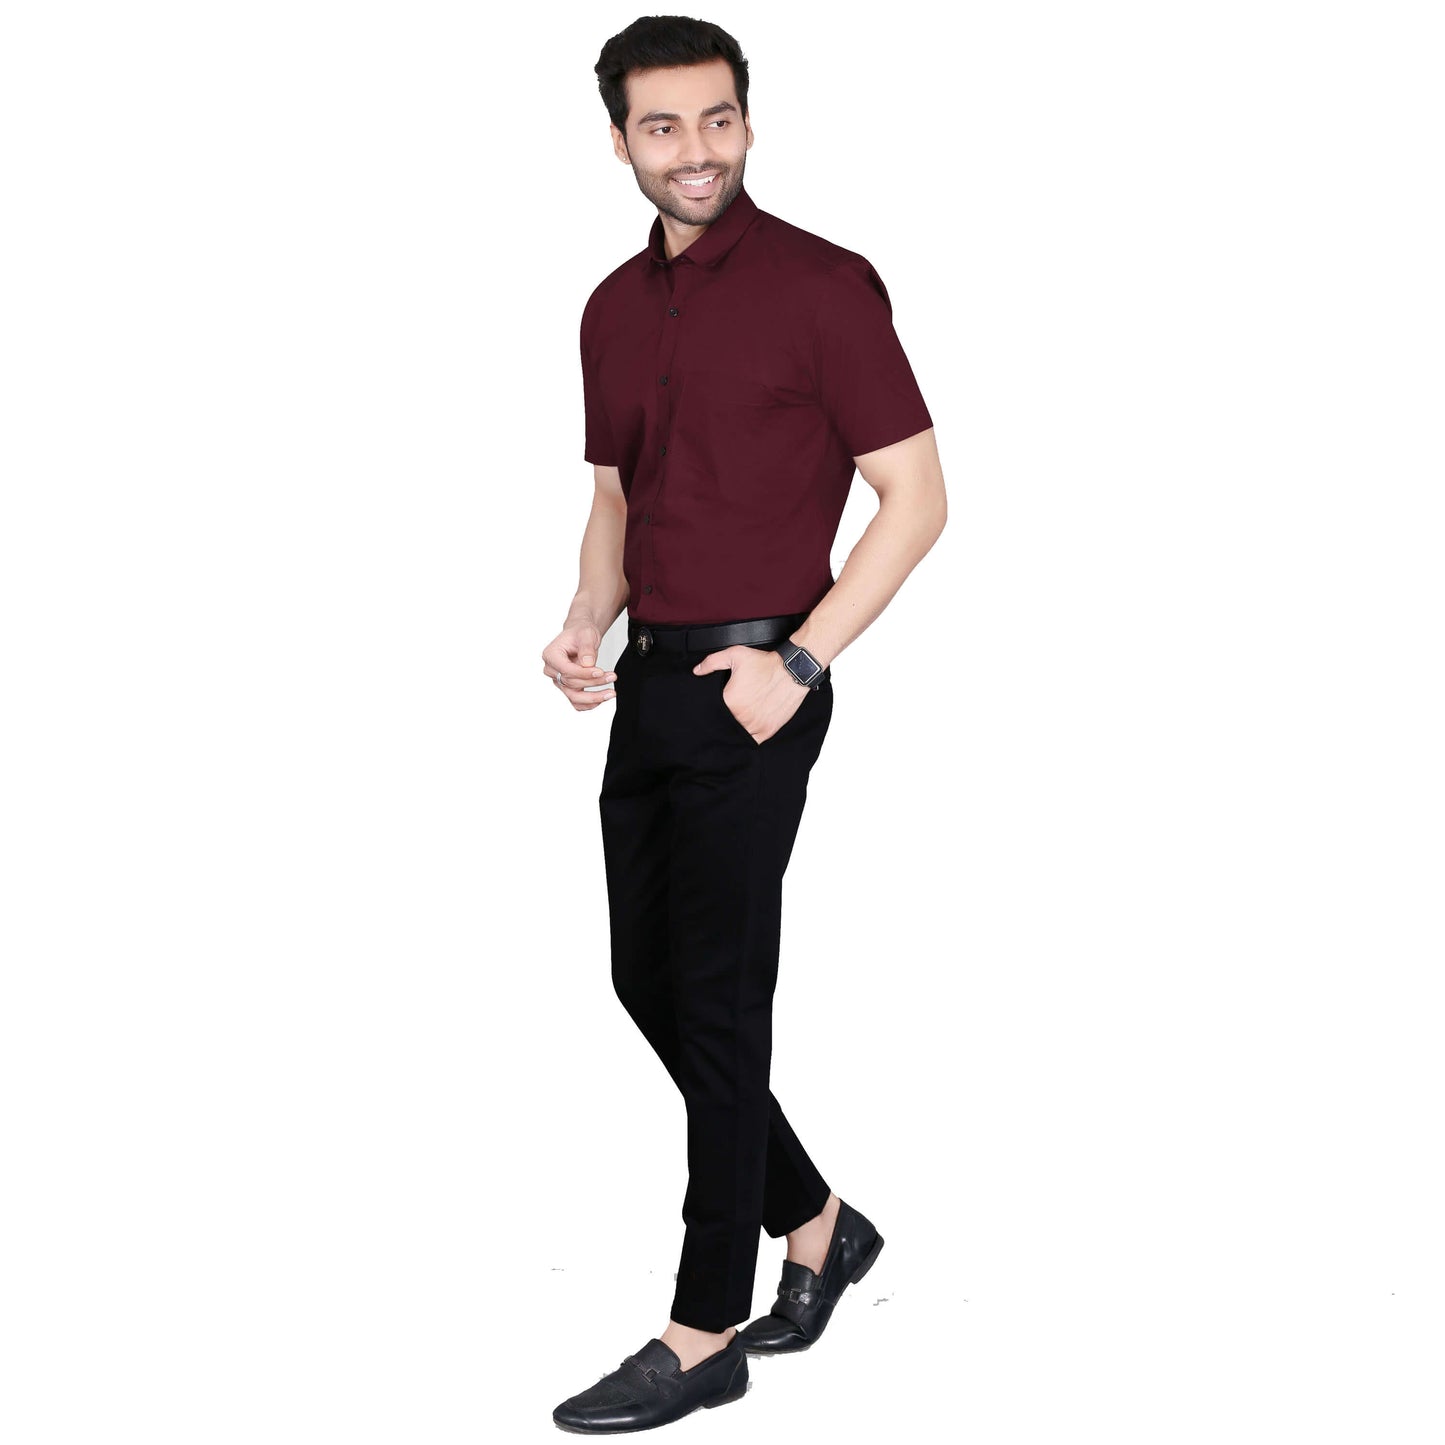 5thanfold Men's Formal Pure Cotton Half Sleeve Solid Maroon Slim Fit Shirt